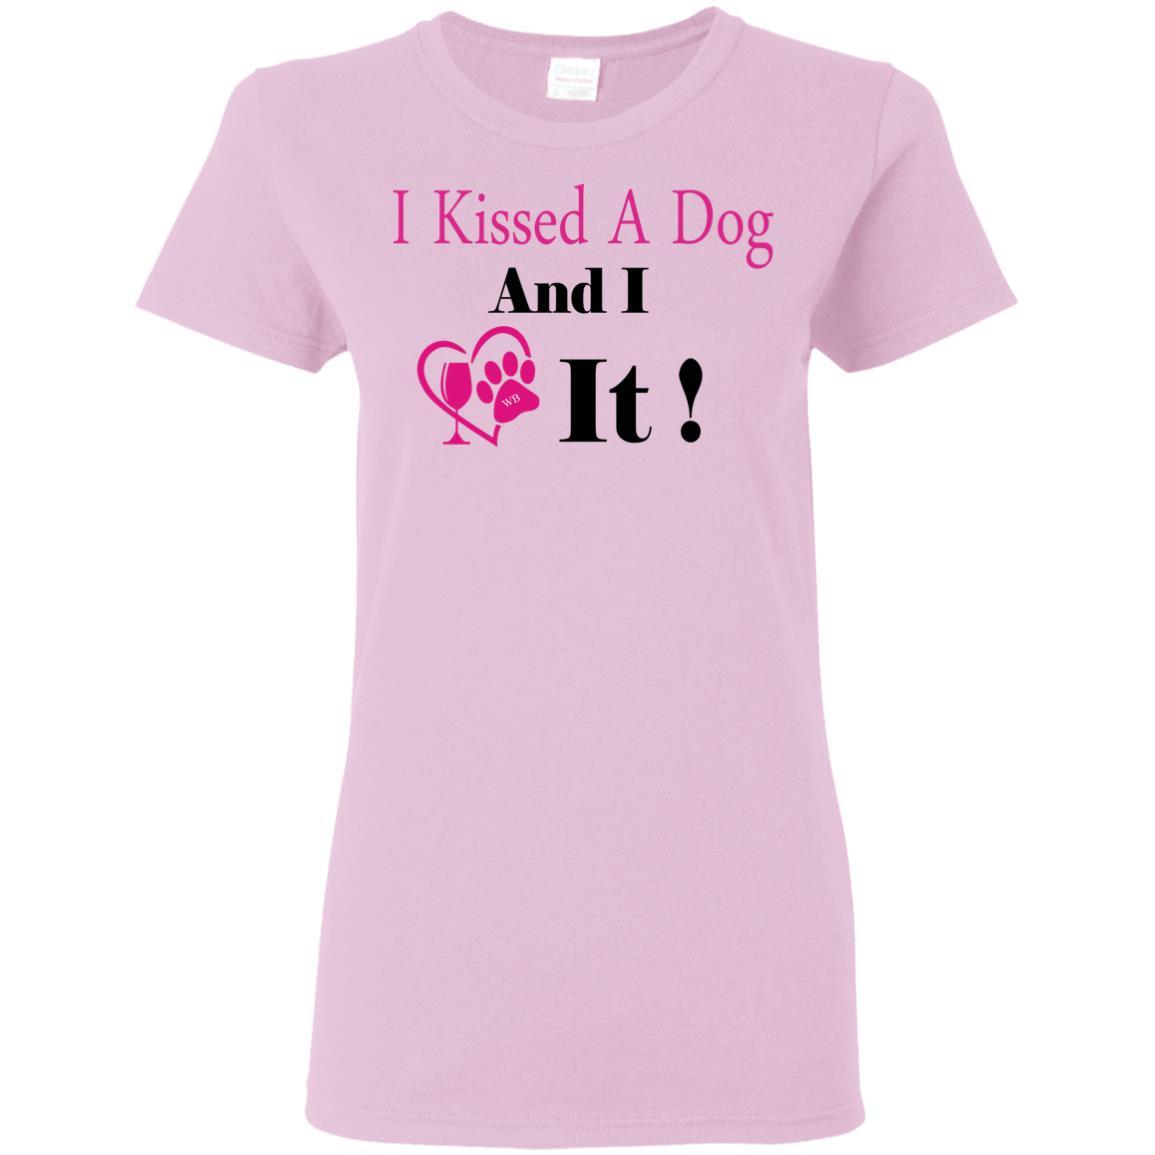 T-Shirts Light Pink / S WineyBitches.co "I Kissed A Dog And I Loved It:" Ladies' 5.3 oz. T-Shirt WineyBitchesCo